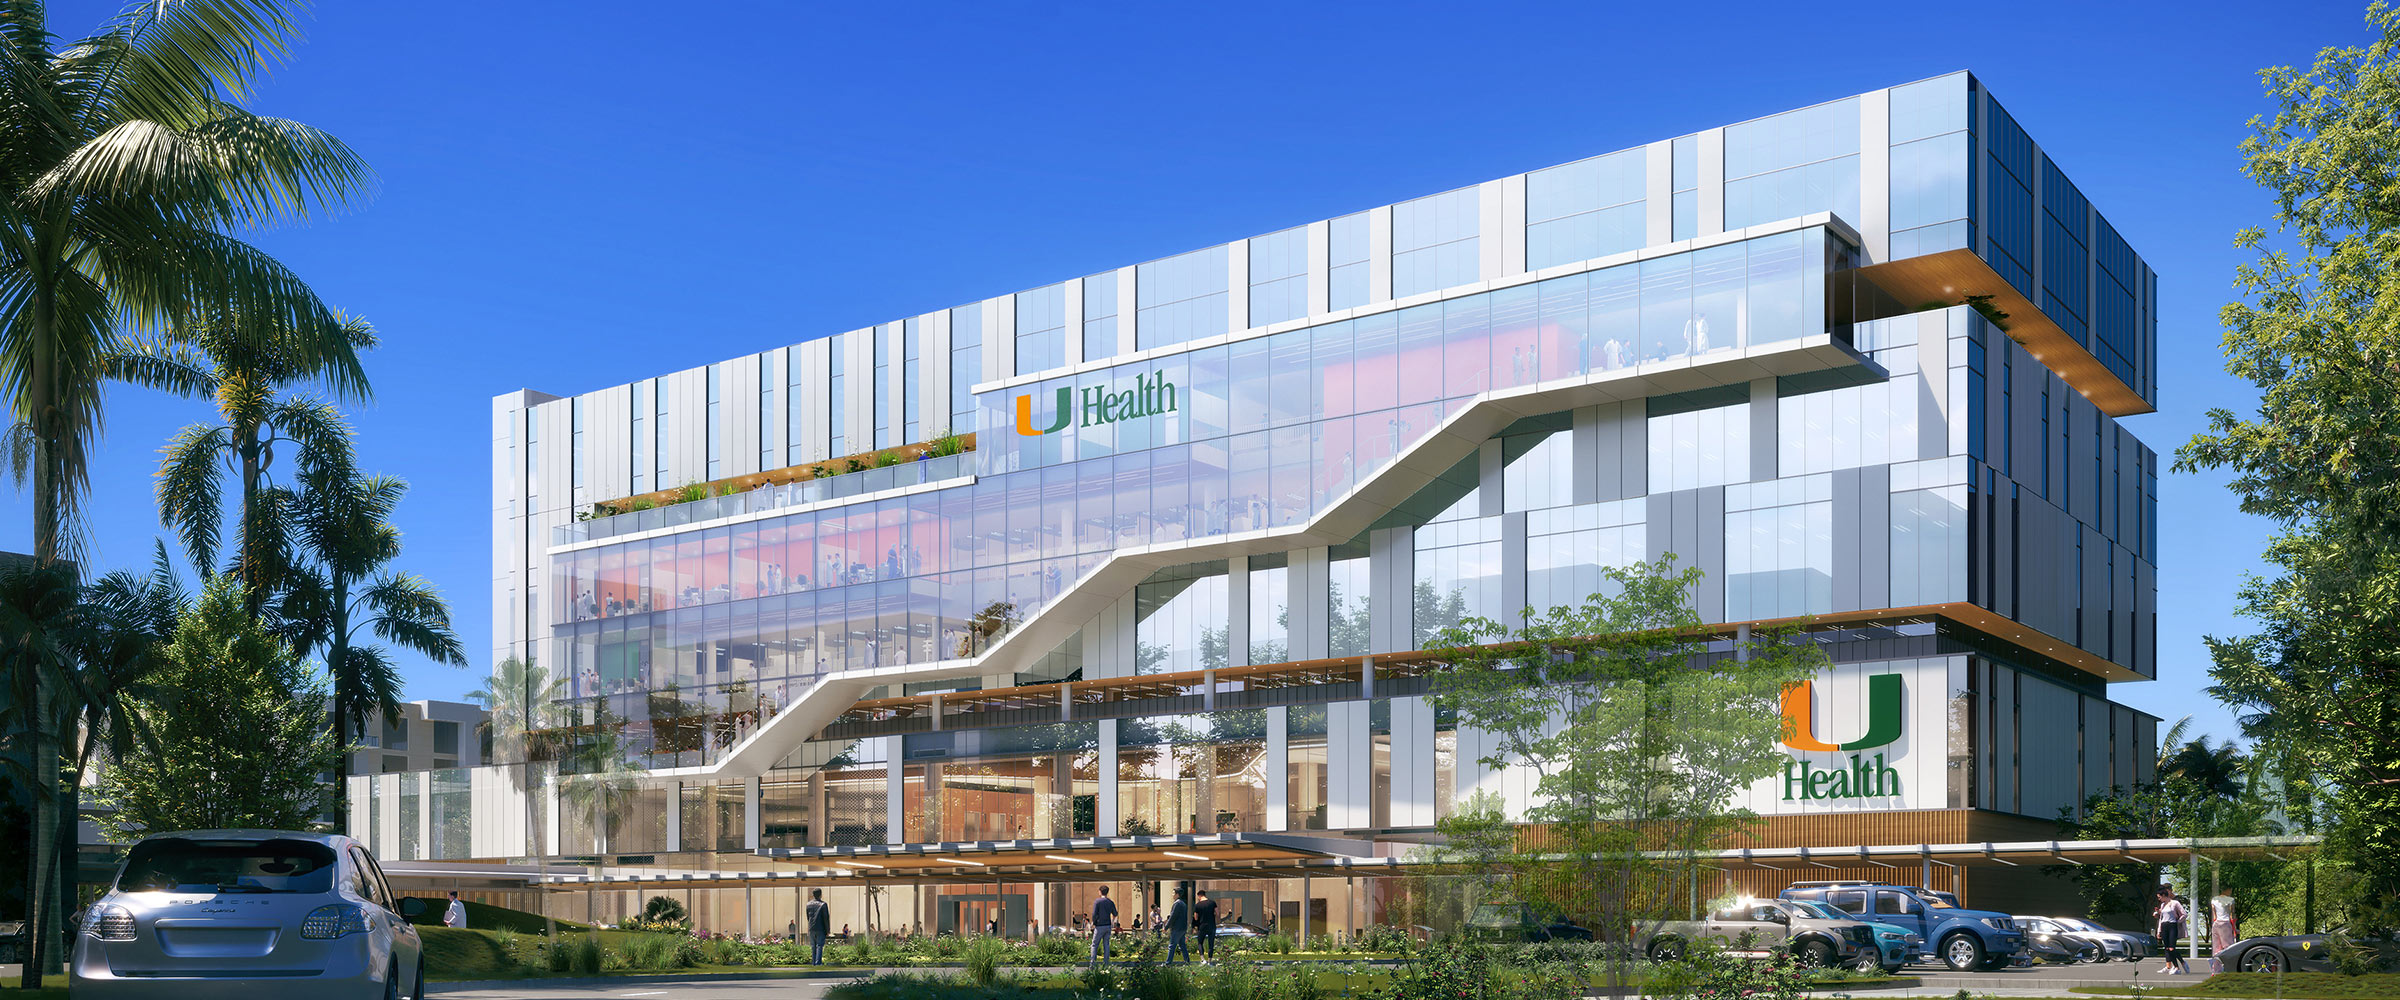 Render of UHealth at Sole Mia Building